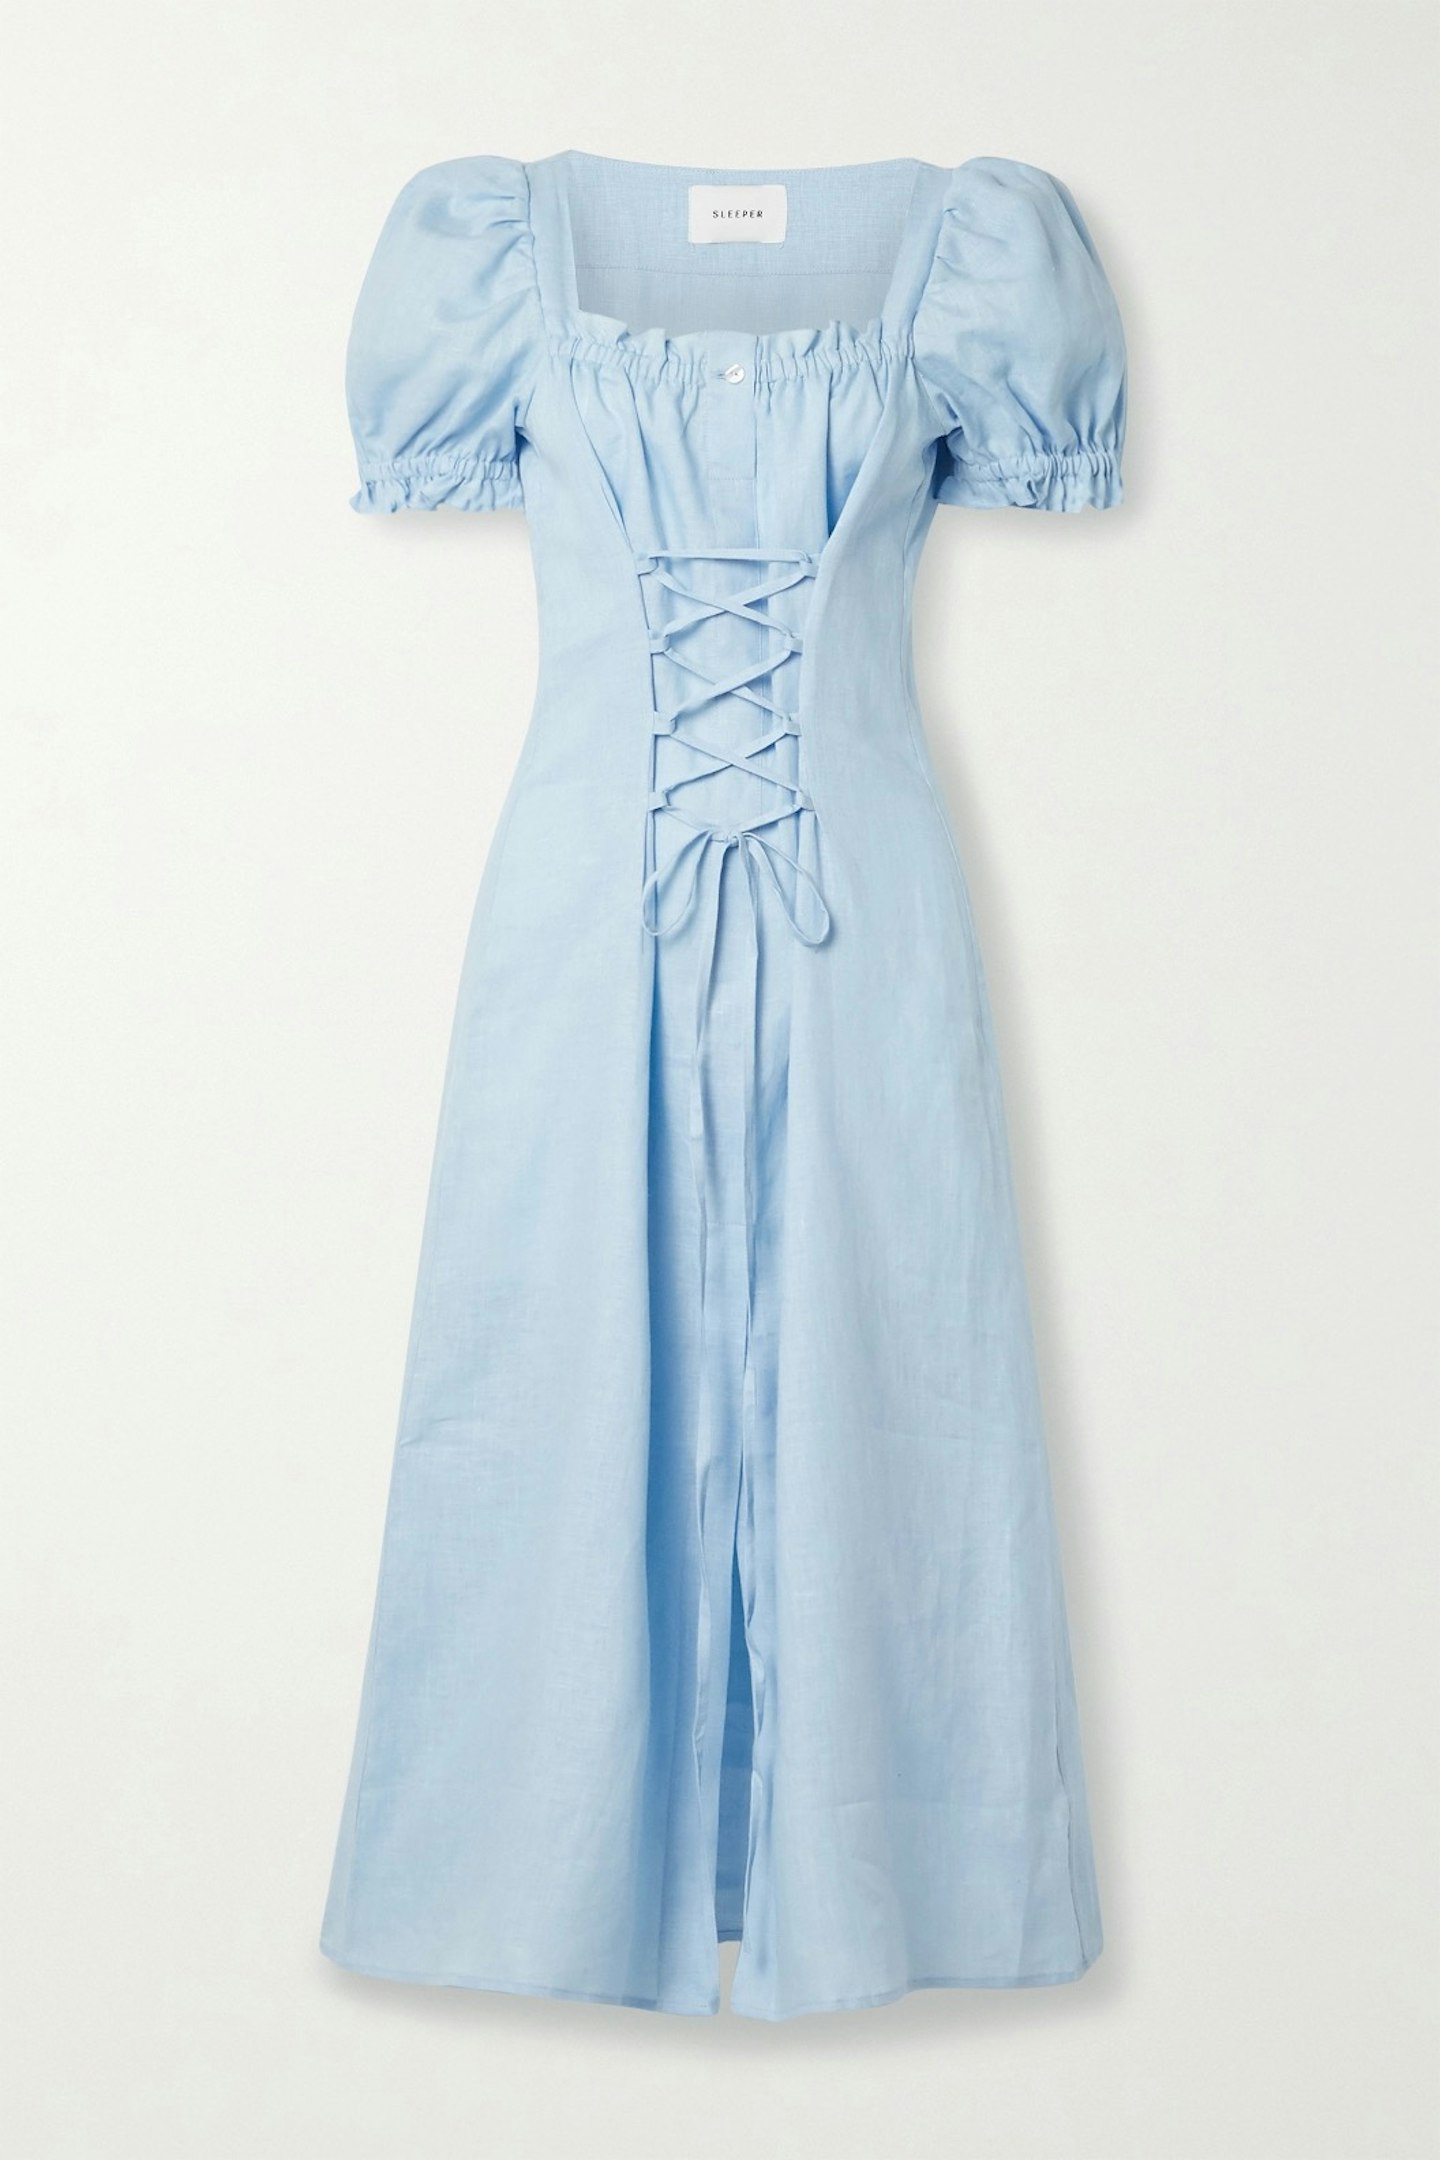 Marquise lace-up linen midi dress  £225